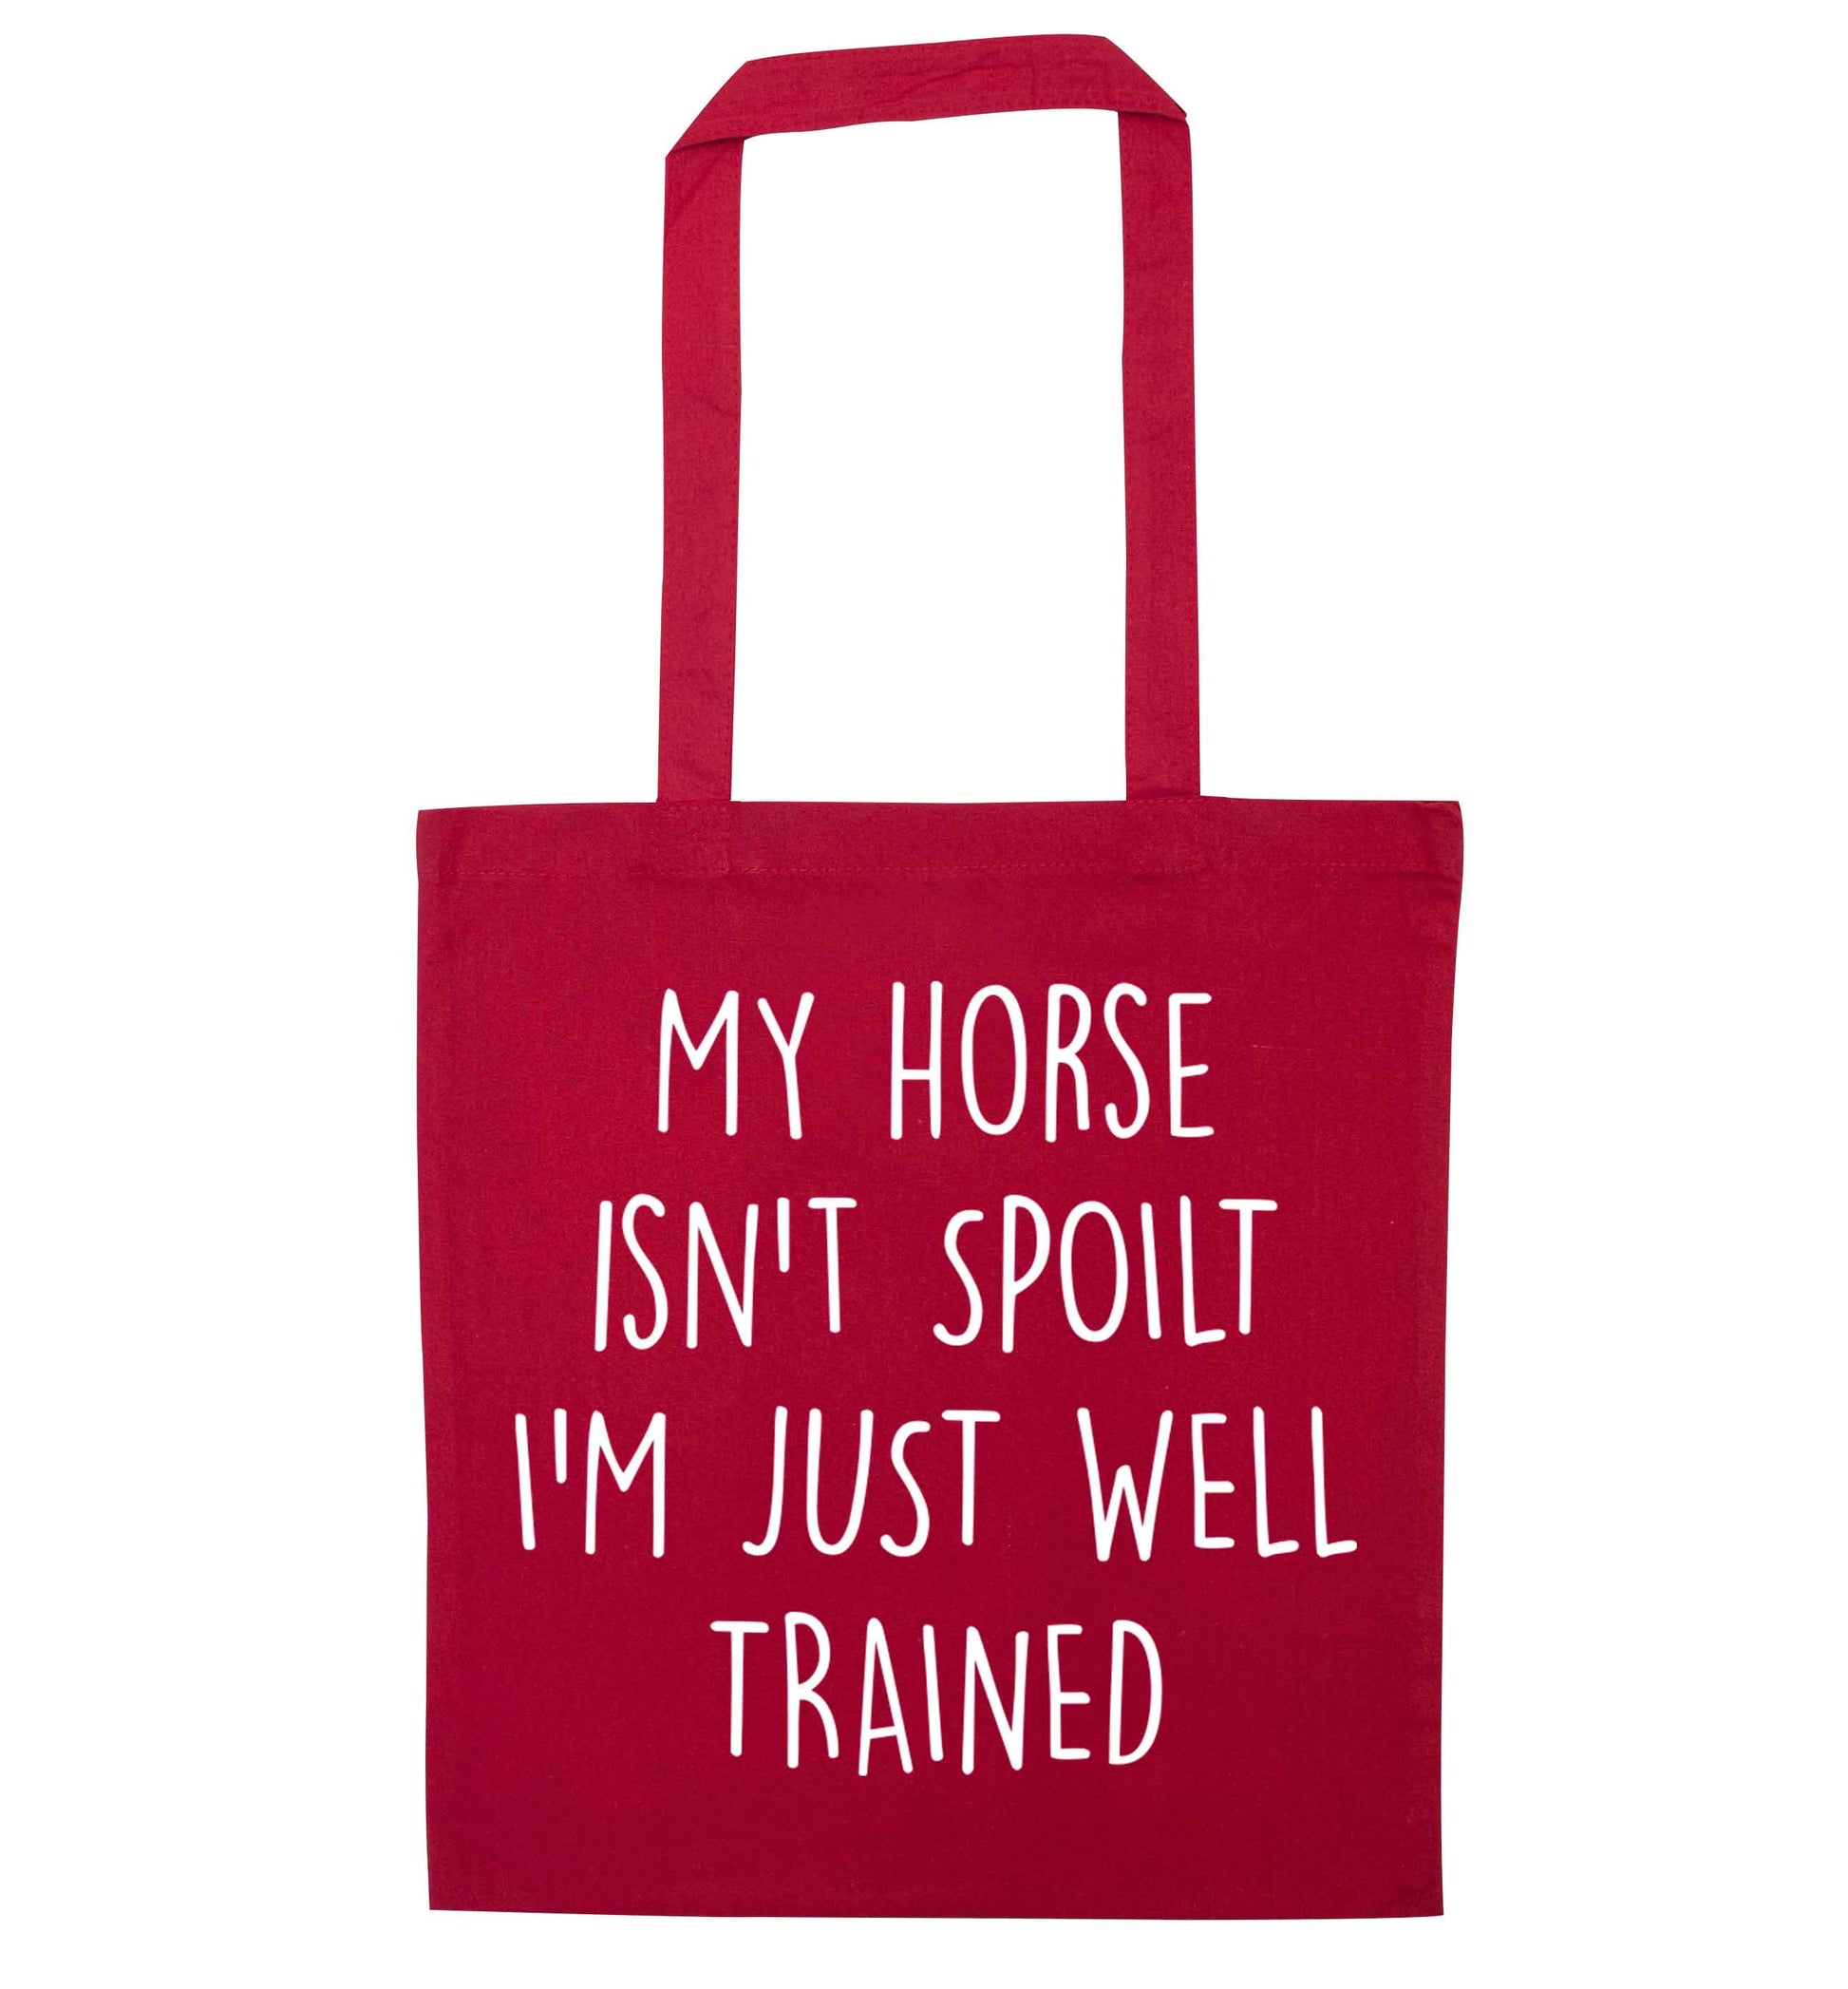 My horse isn't spoilt I'm just well trained red tote bag